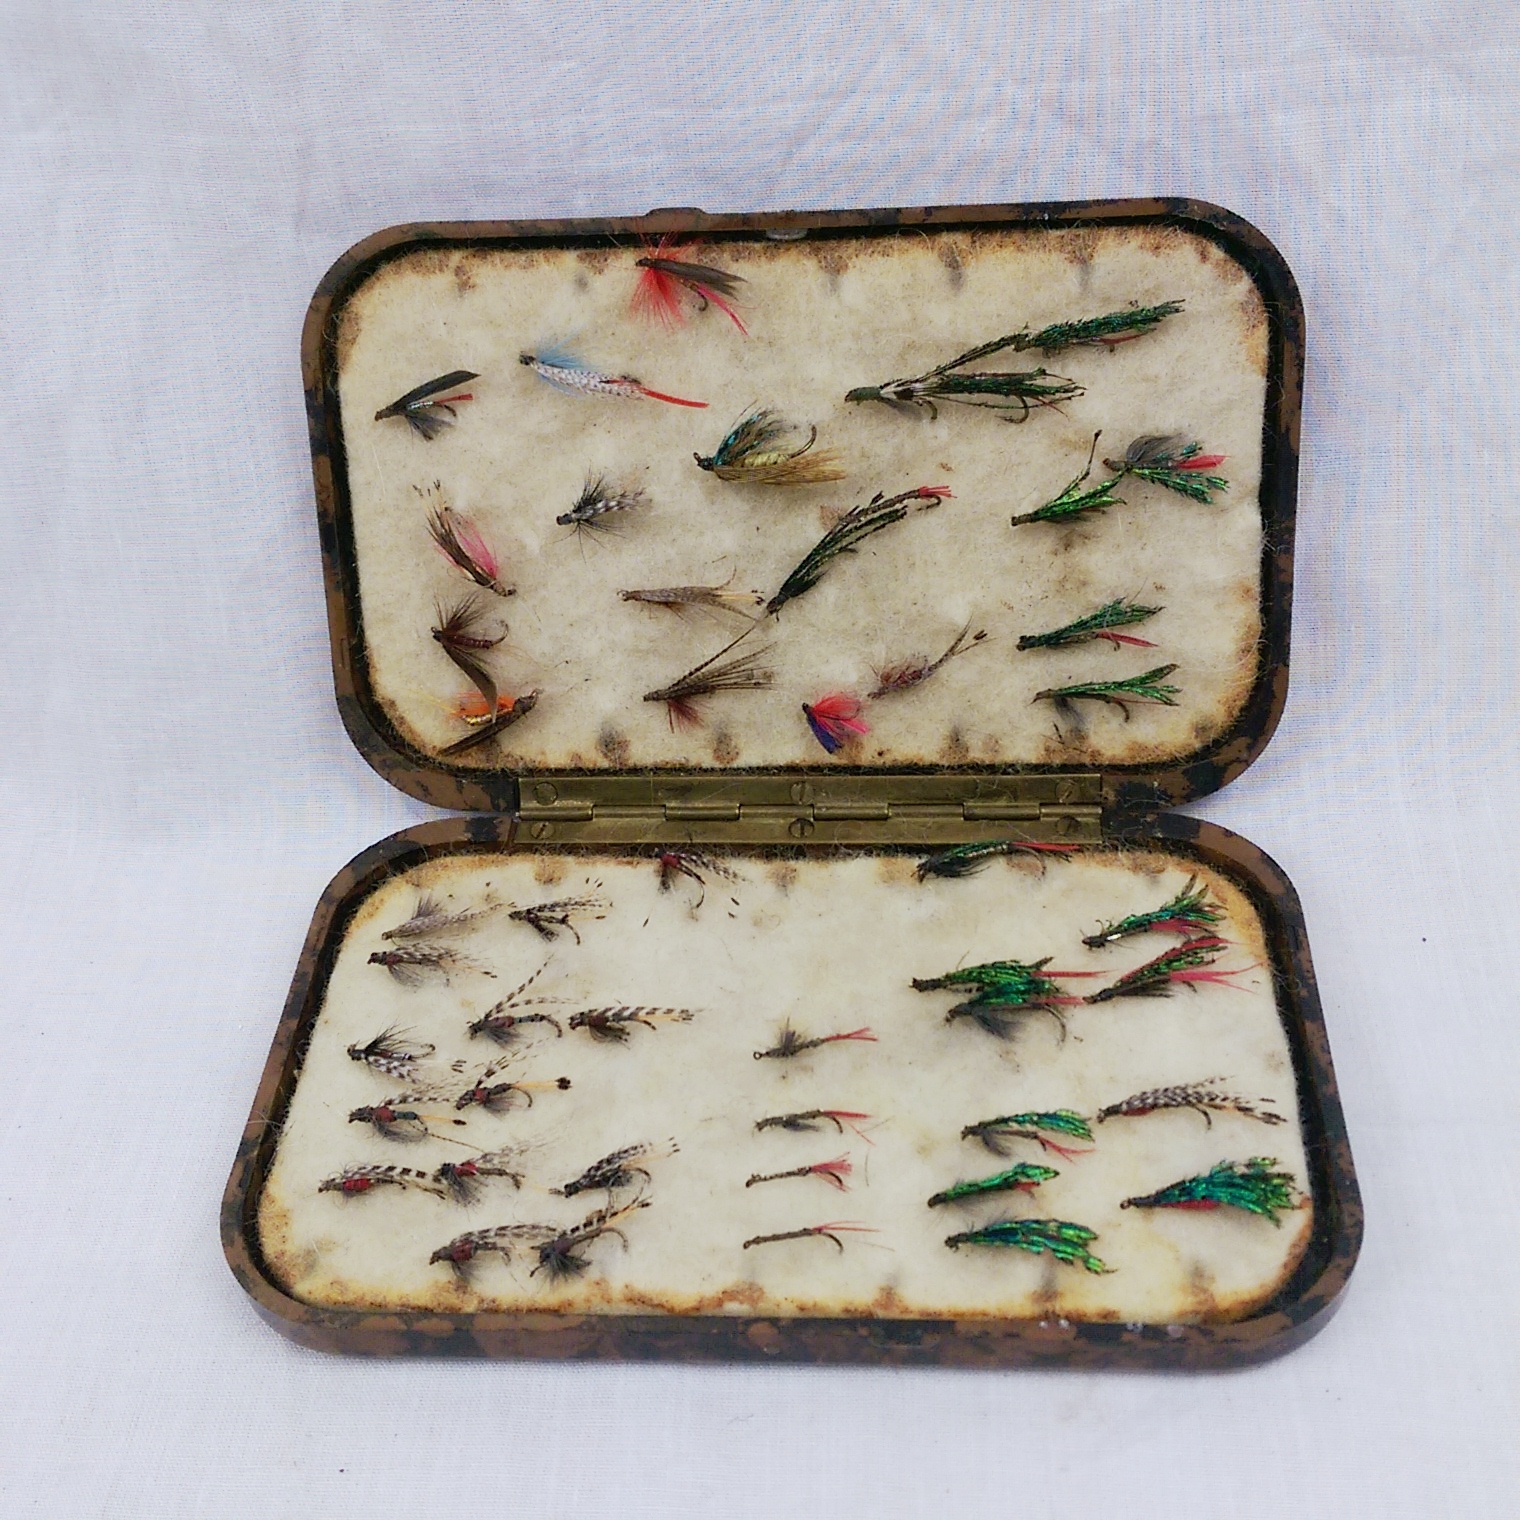 https://sallyantiques.co.uk/wp-content/uploads/2021/07/Hardy-Brothers-Fly-Fishing-Flies-In-A-Bakelite-Case-1.jpg